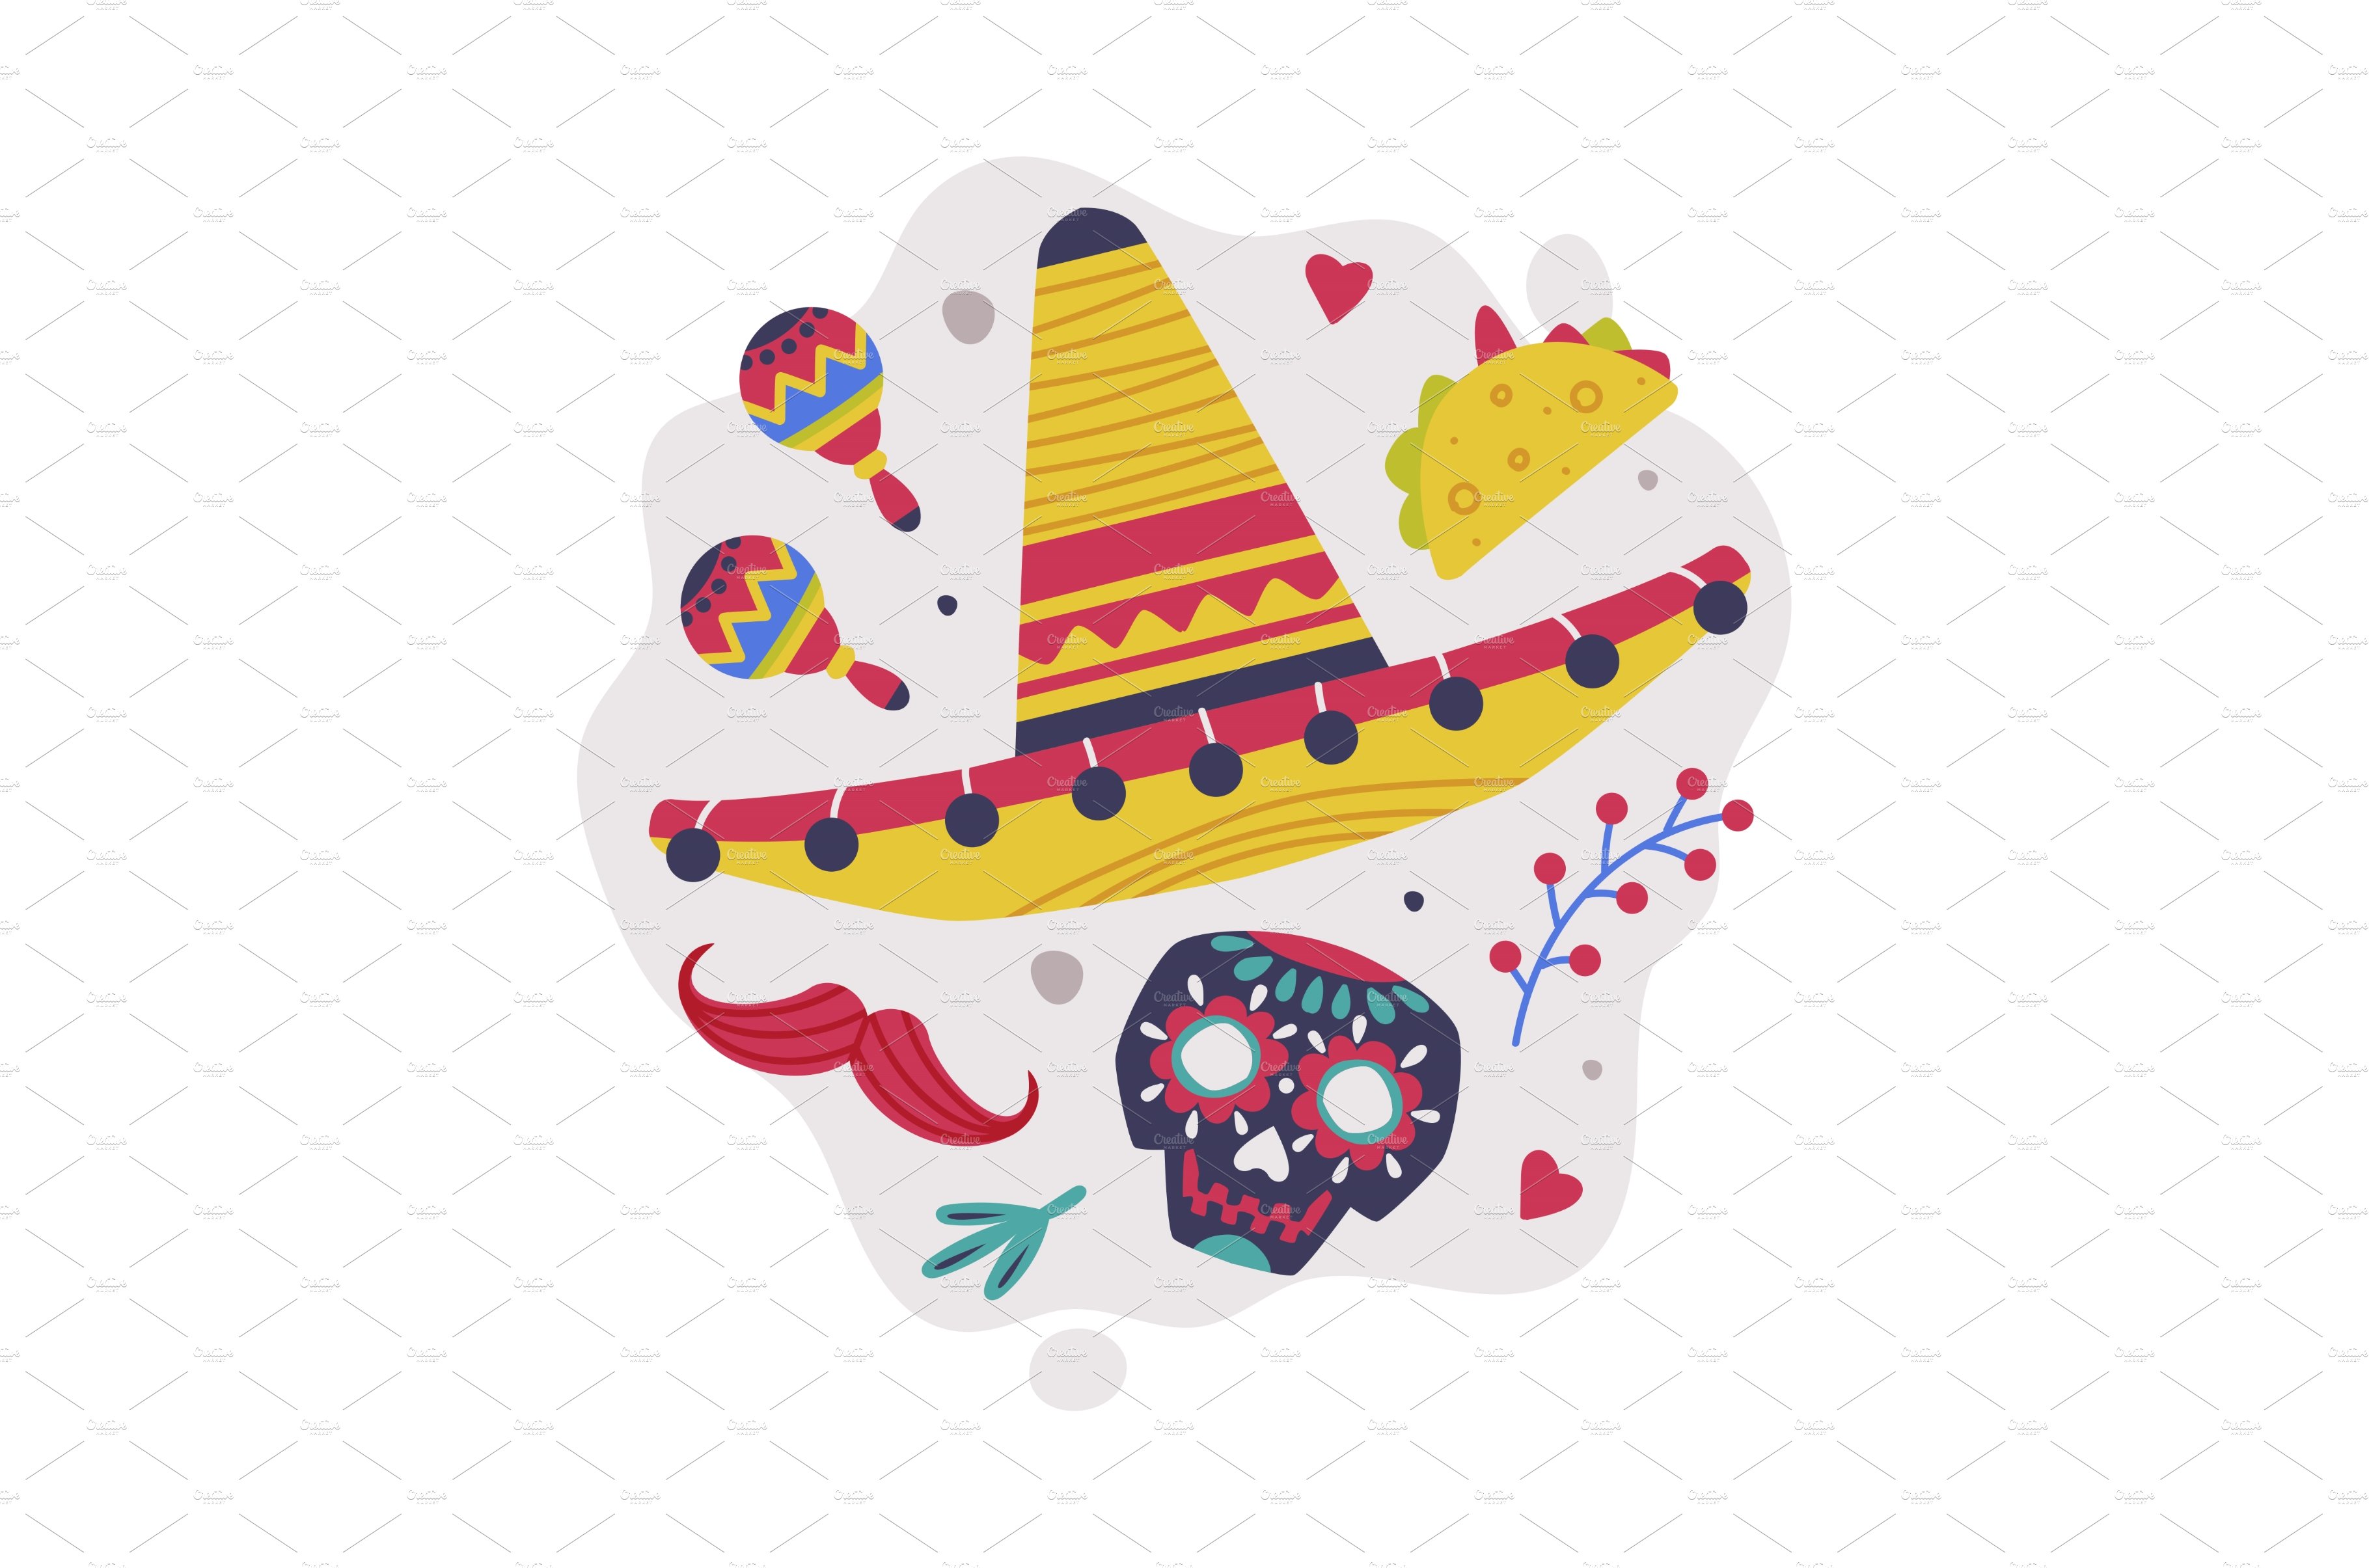 Bright Mexico Object with Sombrero cover image.